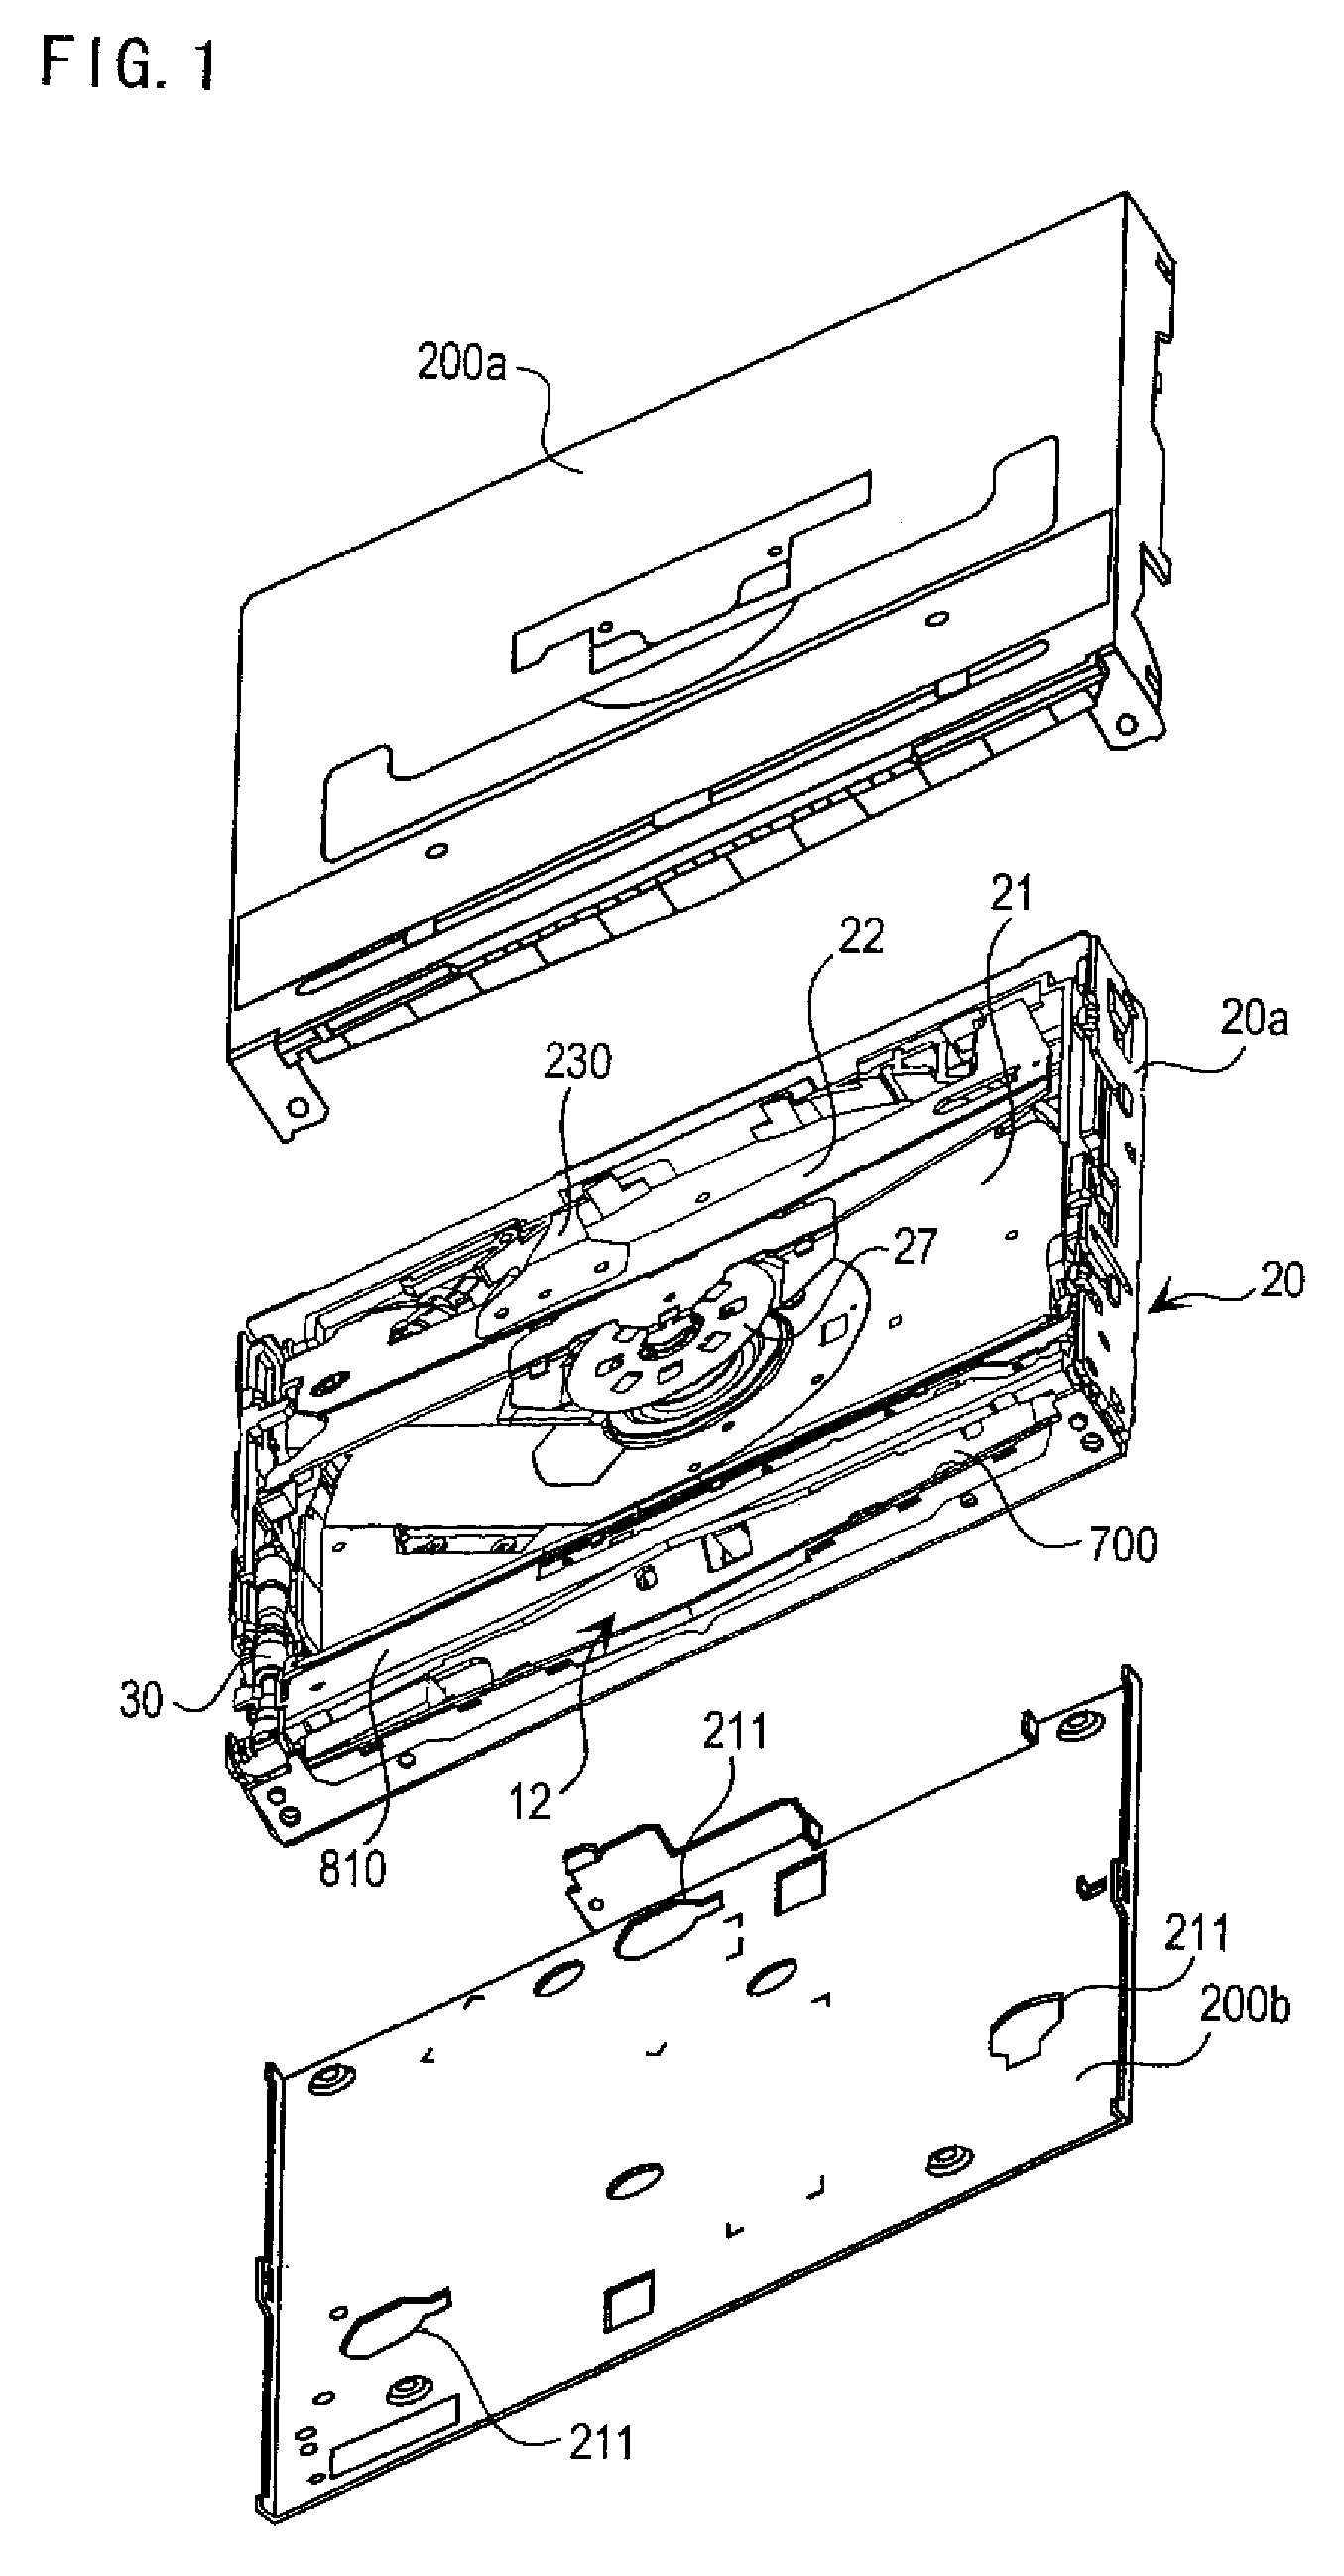 Disc player apparatus with upper and lower rollers for transporting and guiding a disc